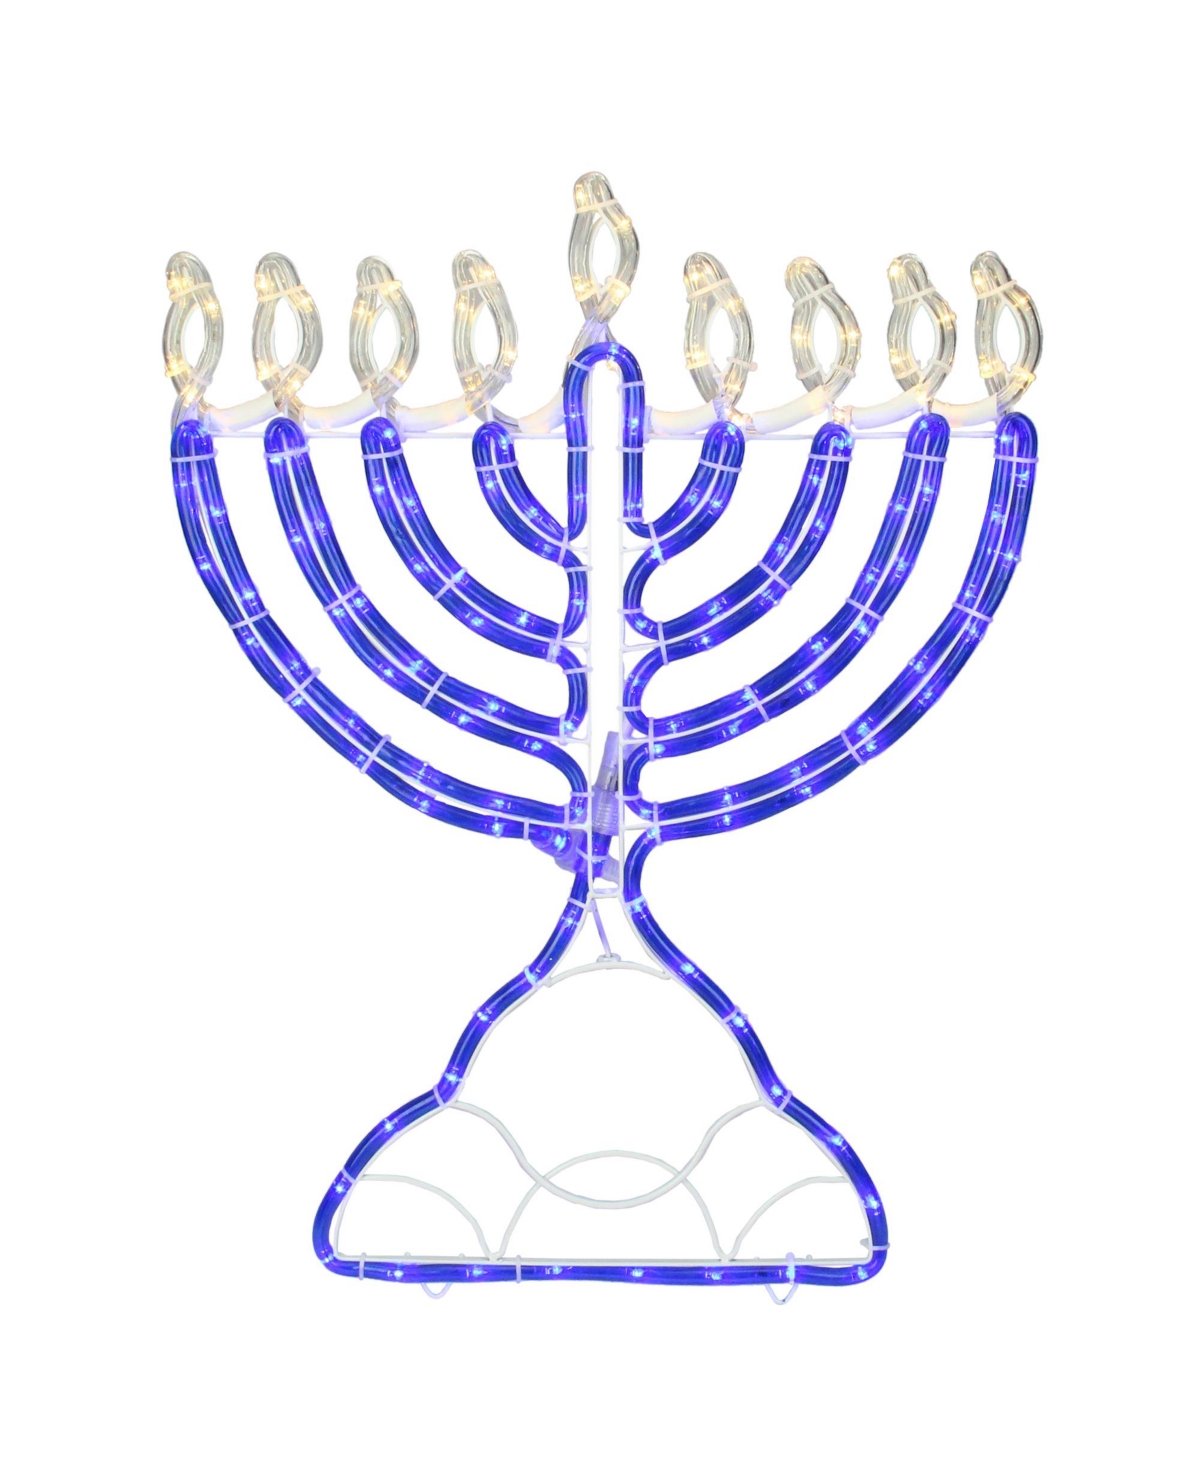 Northlight 150 Clear And Blue Led Hanukkah Menorah Rope Lights, 1.4 Feet White Wire In Transparent